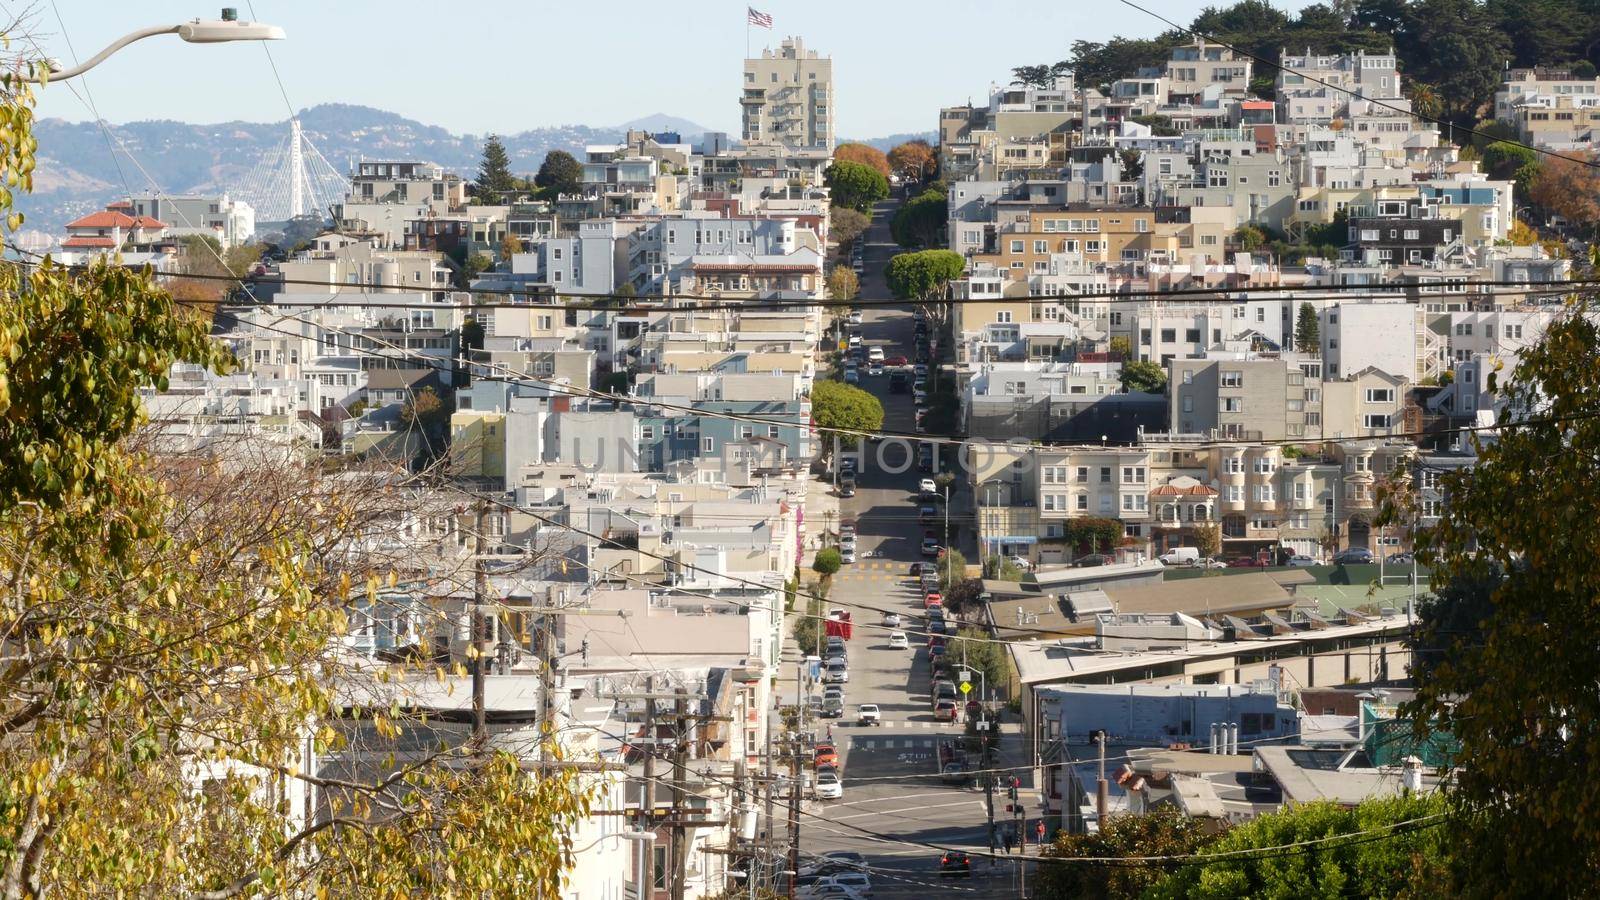 Iconic hilly street and crossroads in San Francisco, Northern California, USA. Steep downhill road and pedestrian walkway. Downtown real estate, victorian townhouses abd other residential buildings by DogoraSun